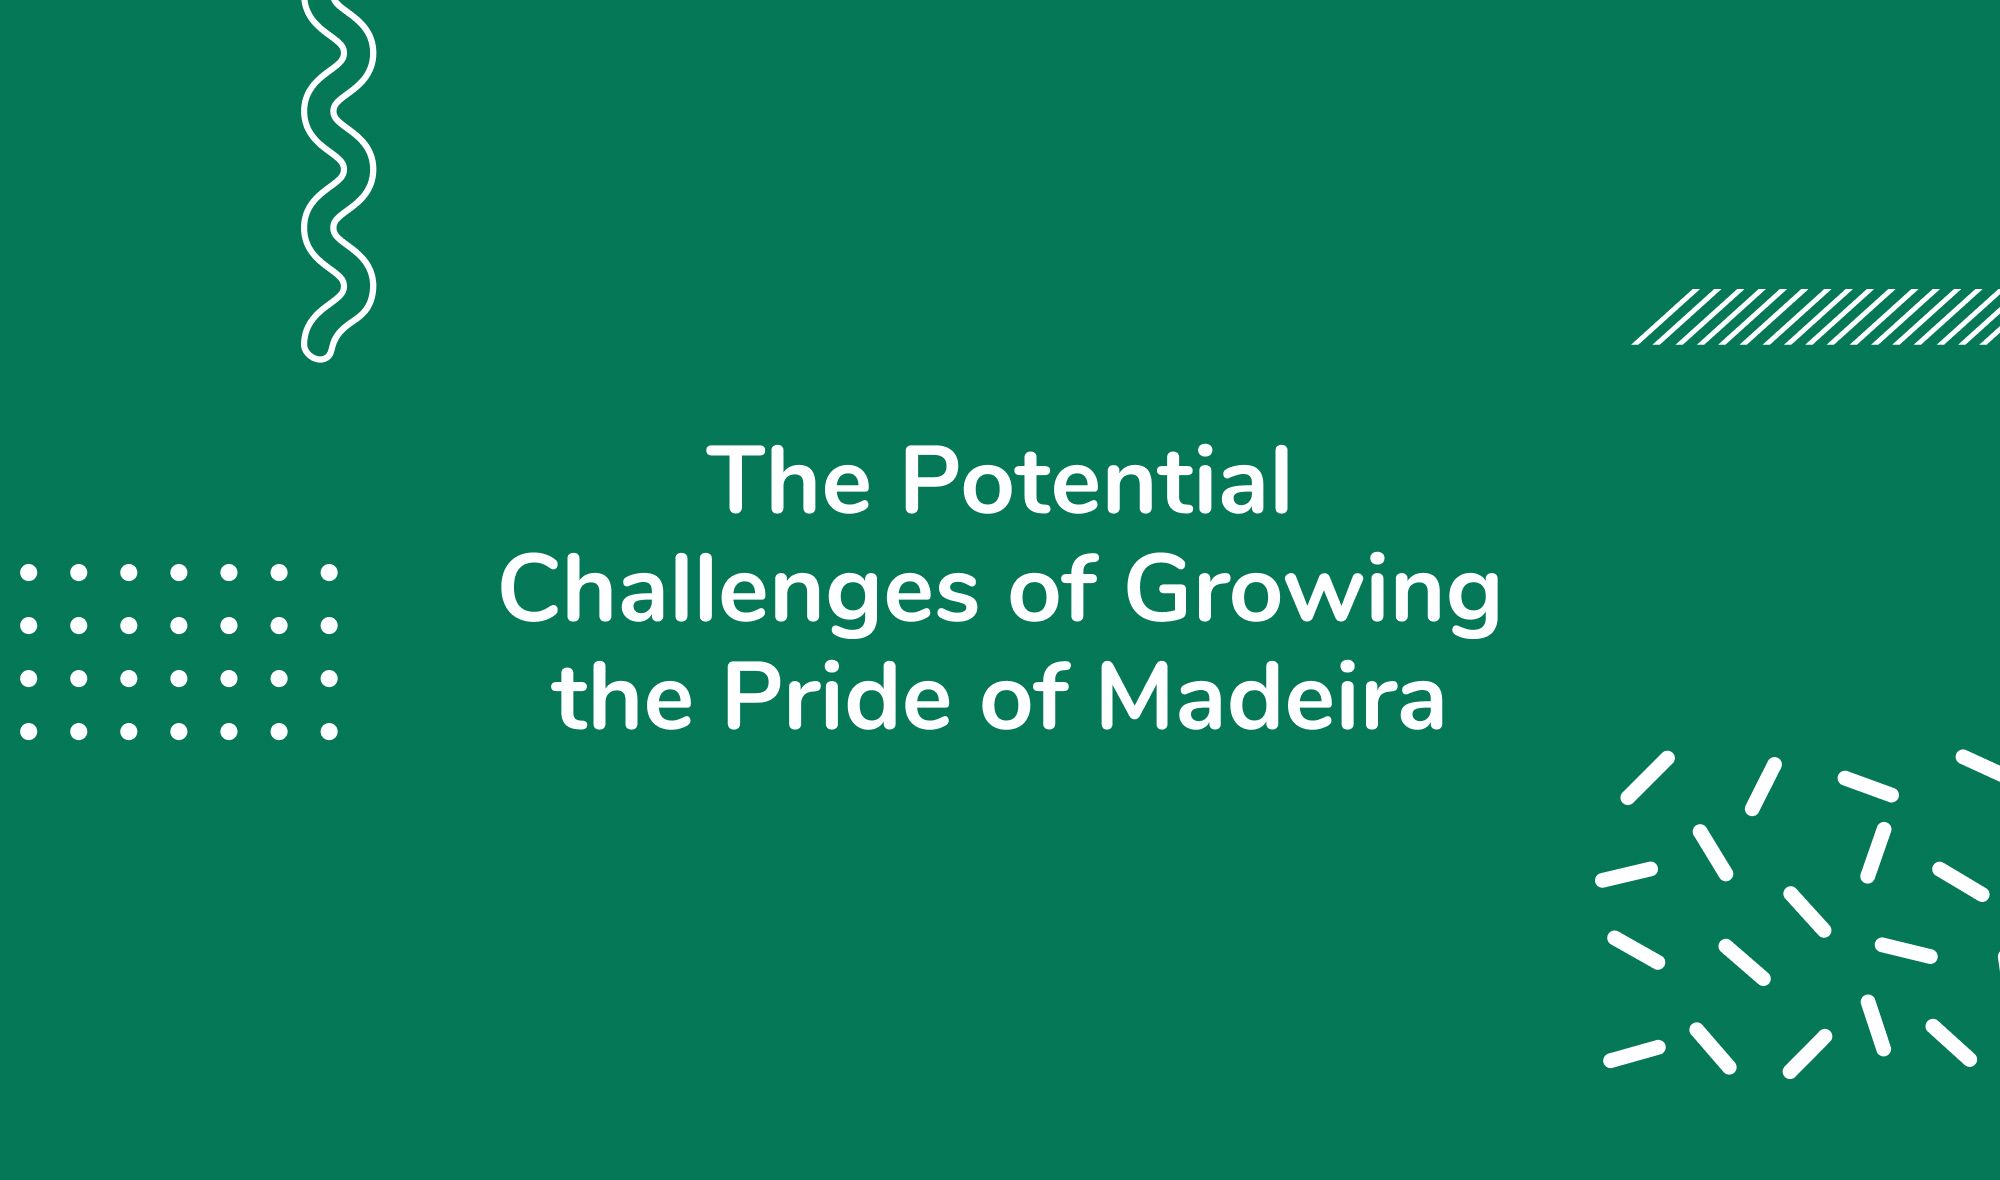 The Potential Challenges of Growing the Pride of Madeira